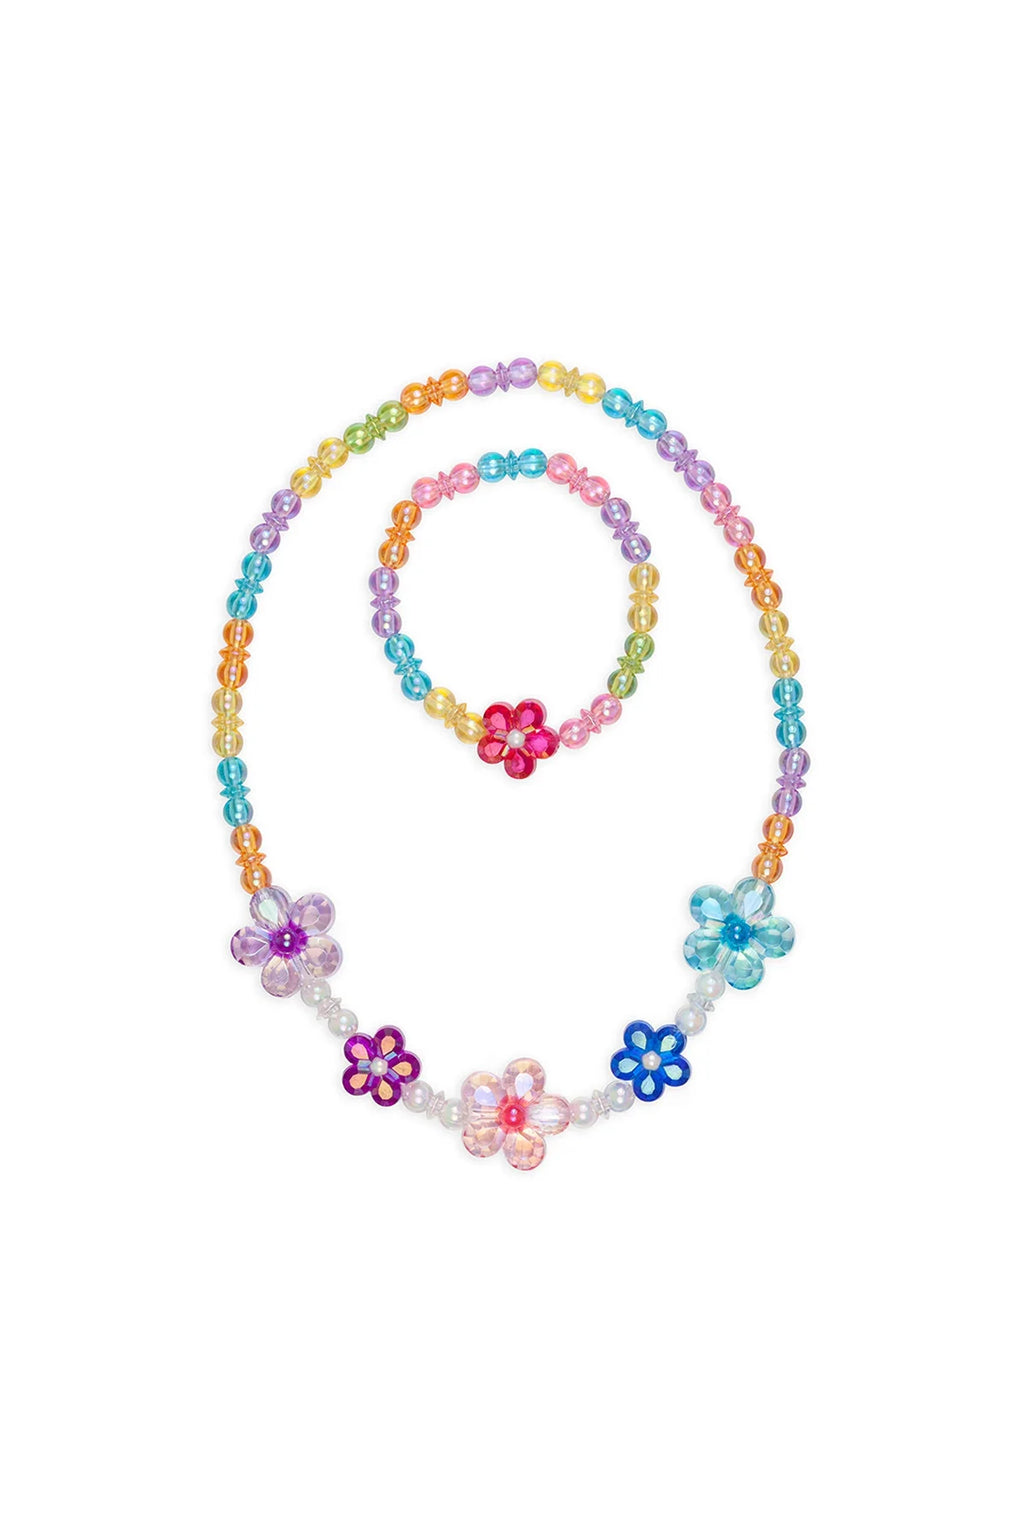 Blooming Beads necklace and bracelet